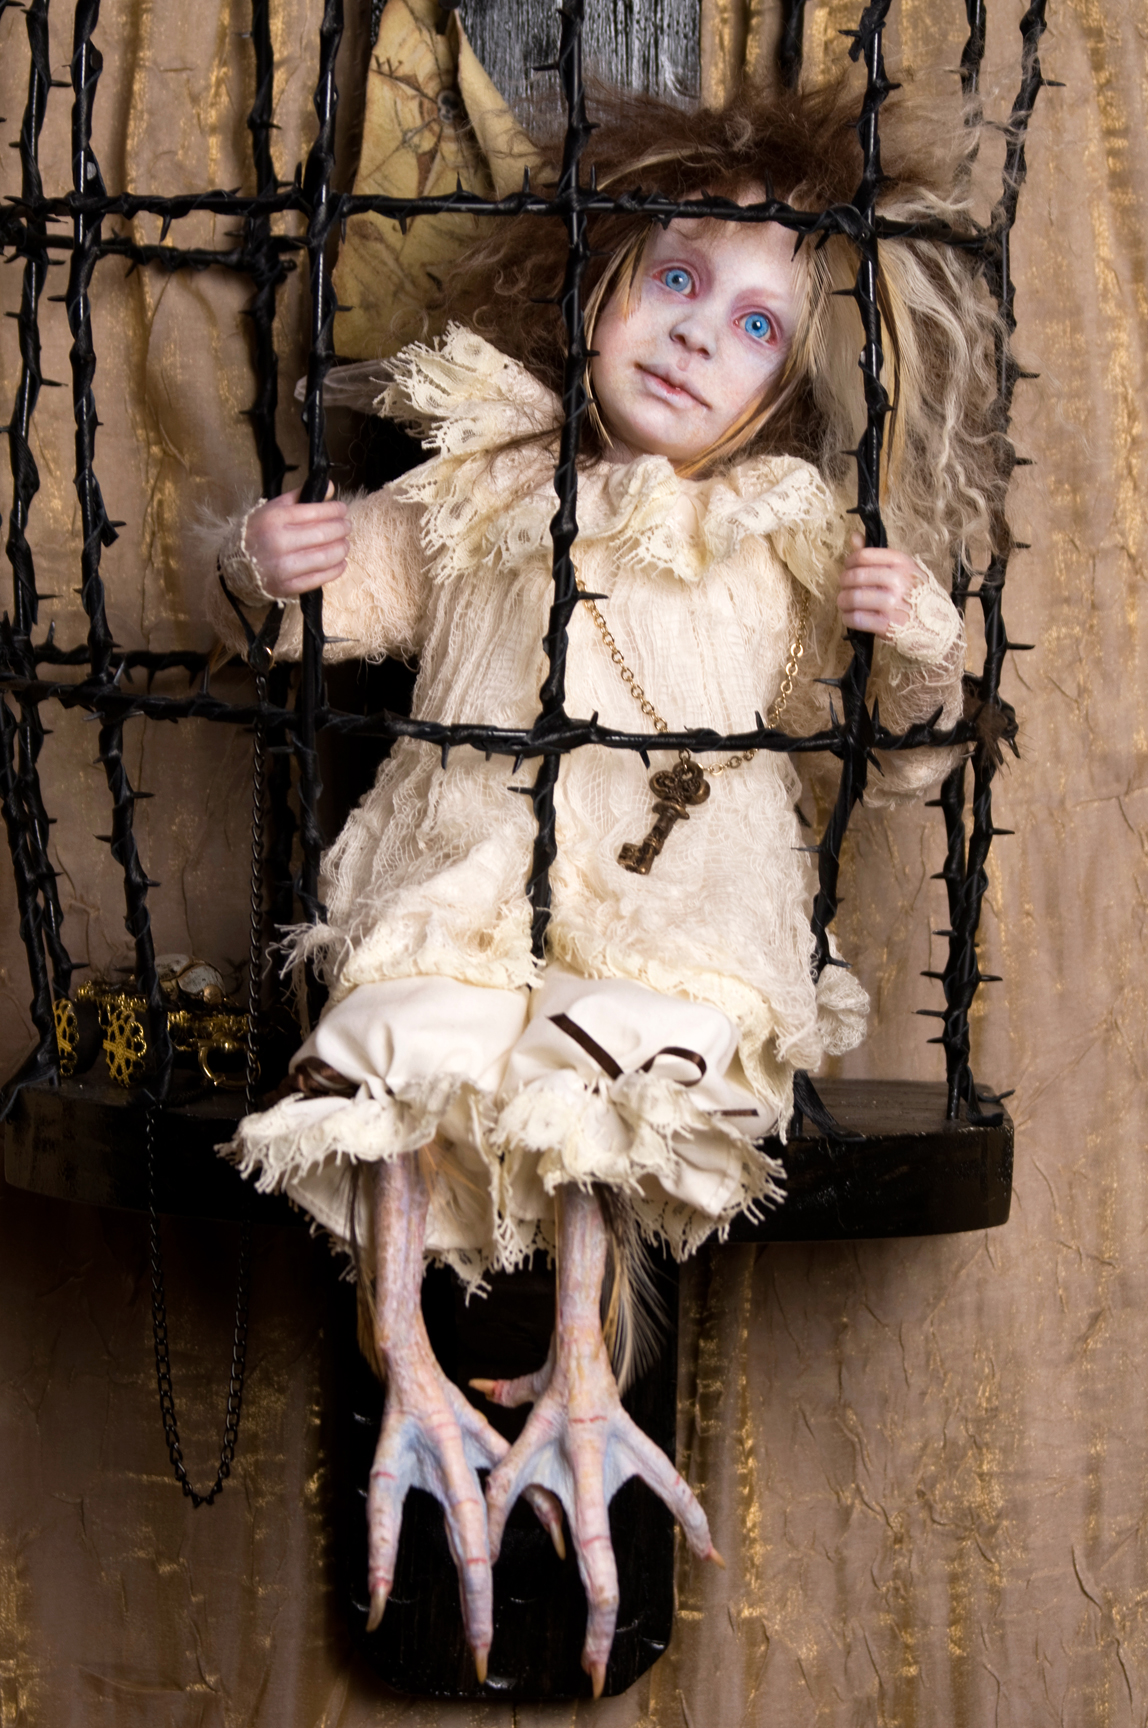 pale blue eyed blond feathered gothic artdoll in a white lace nightie with taxidermied bird feet sits in a black thorn cage with a large key on a chain around his neck.